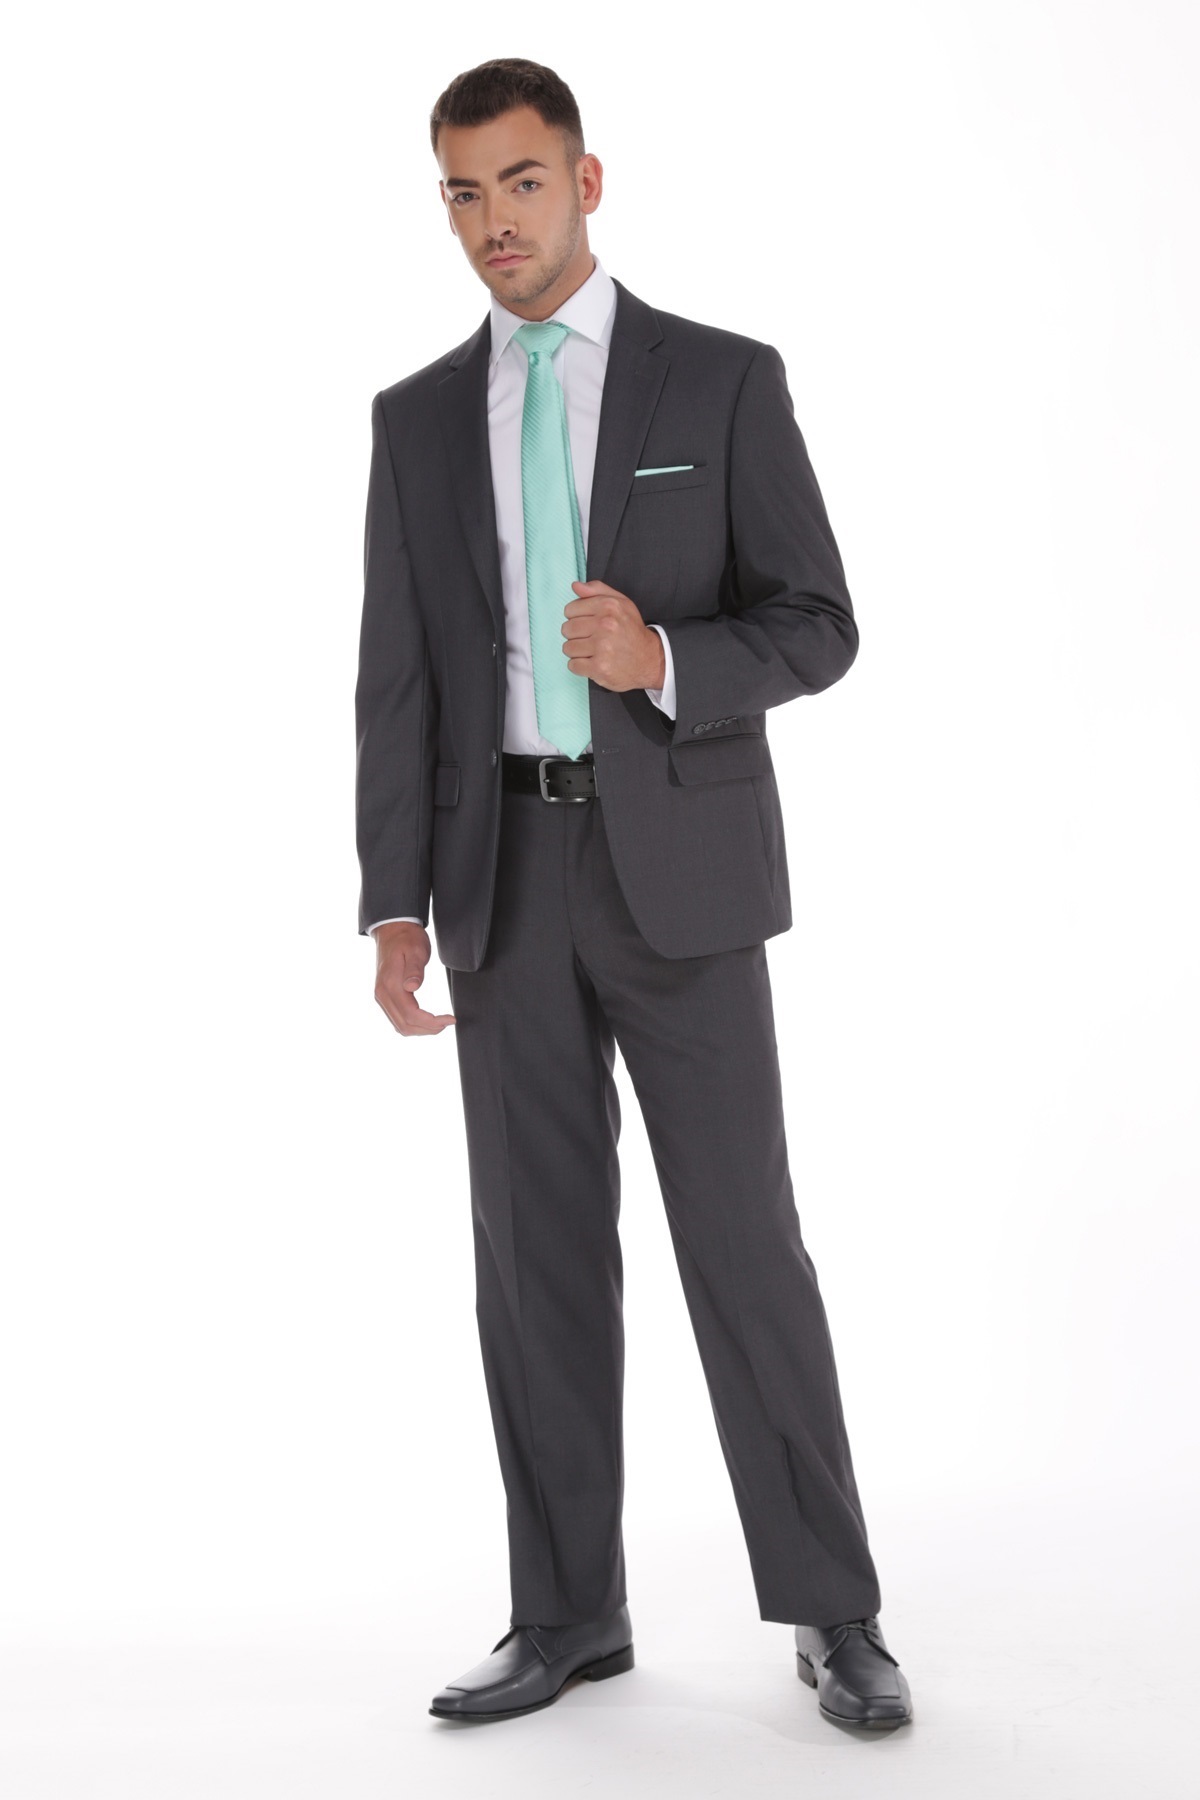 Men's Charcoal Gray Suit Article - How to wear a custom bespoke grey  charcoal mens suit